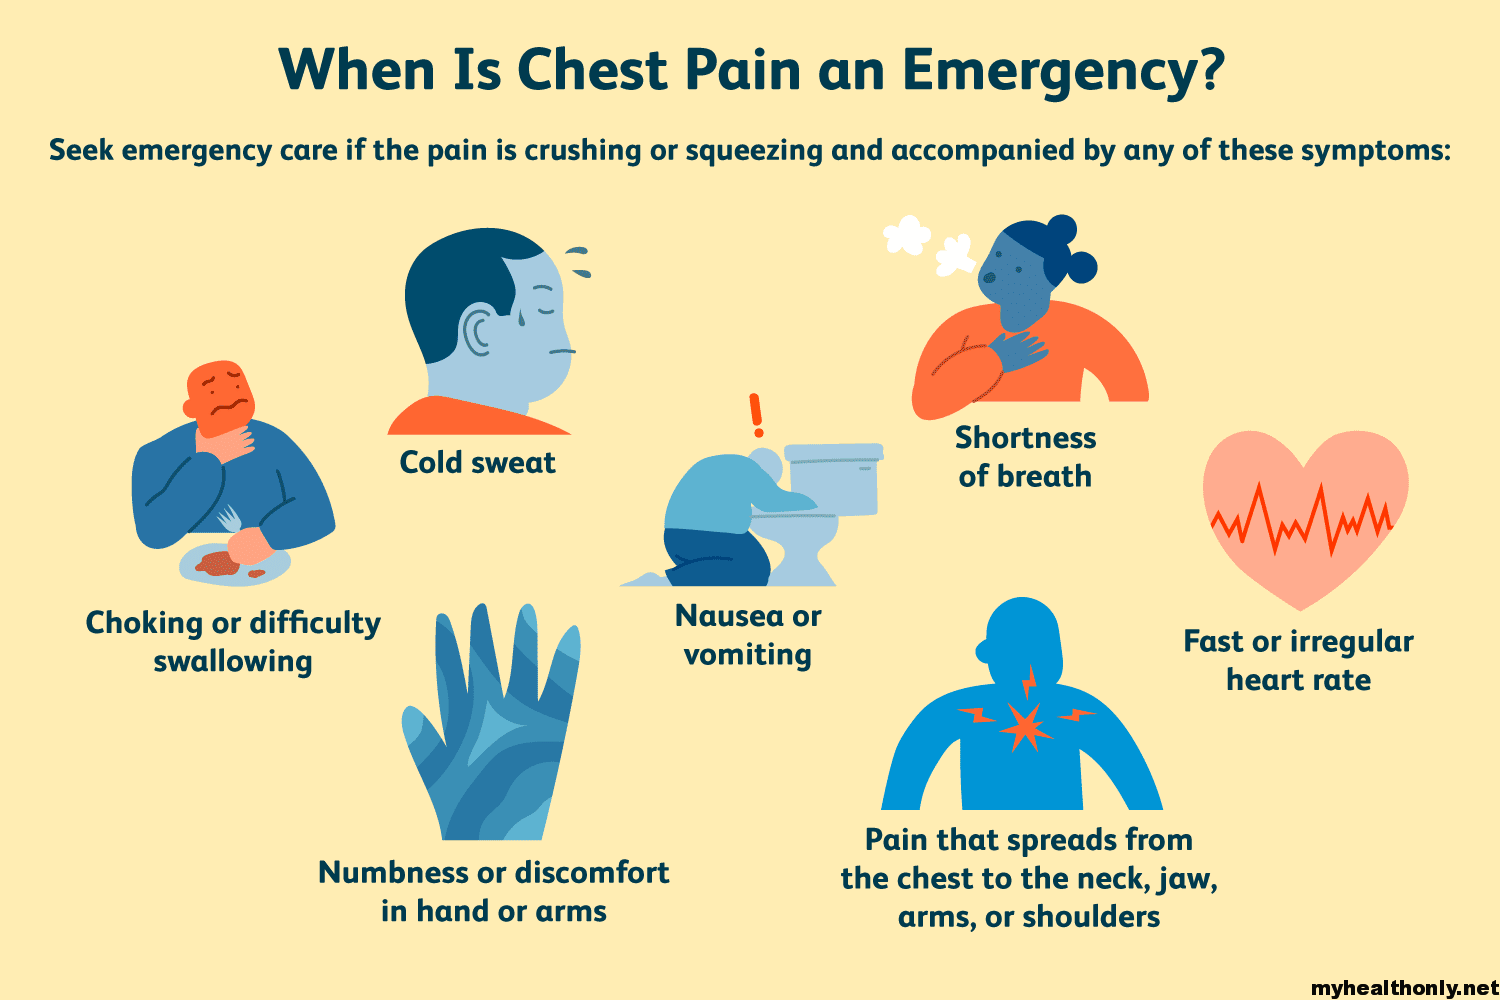 sudden sharp pain in chest that goes away quickly